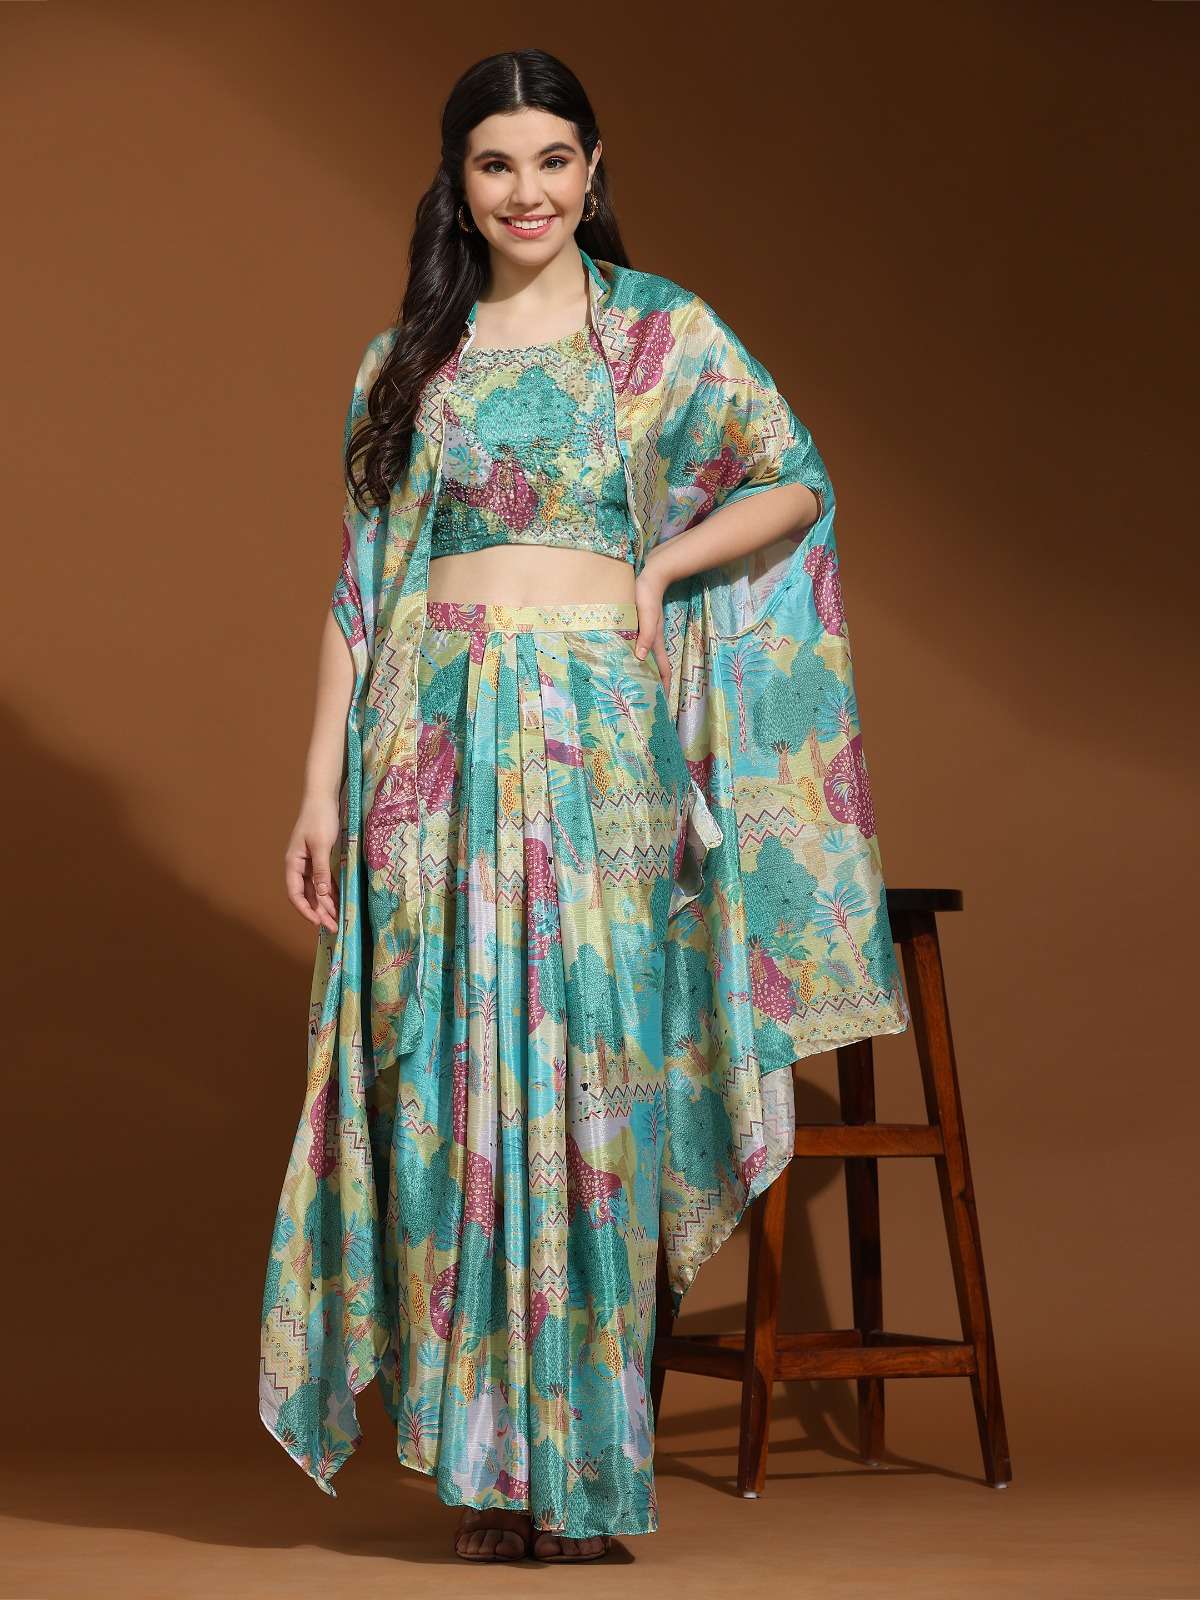 indowwestern collection 3 piece top skirt and shrug design no c342 top hand work blouse skirt chinon fabric with cowl and shrug designer print 